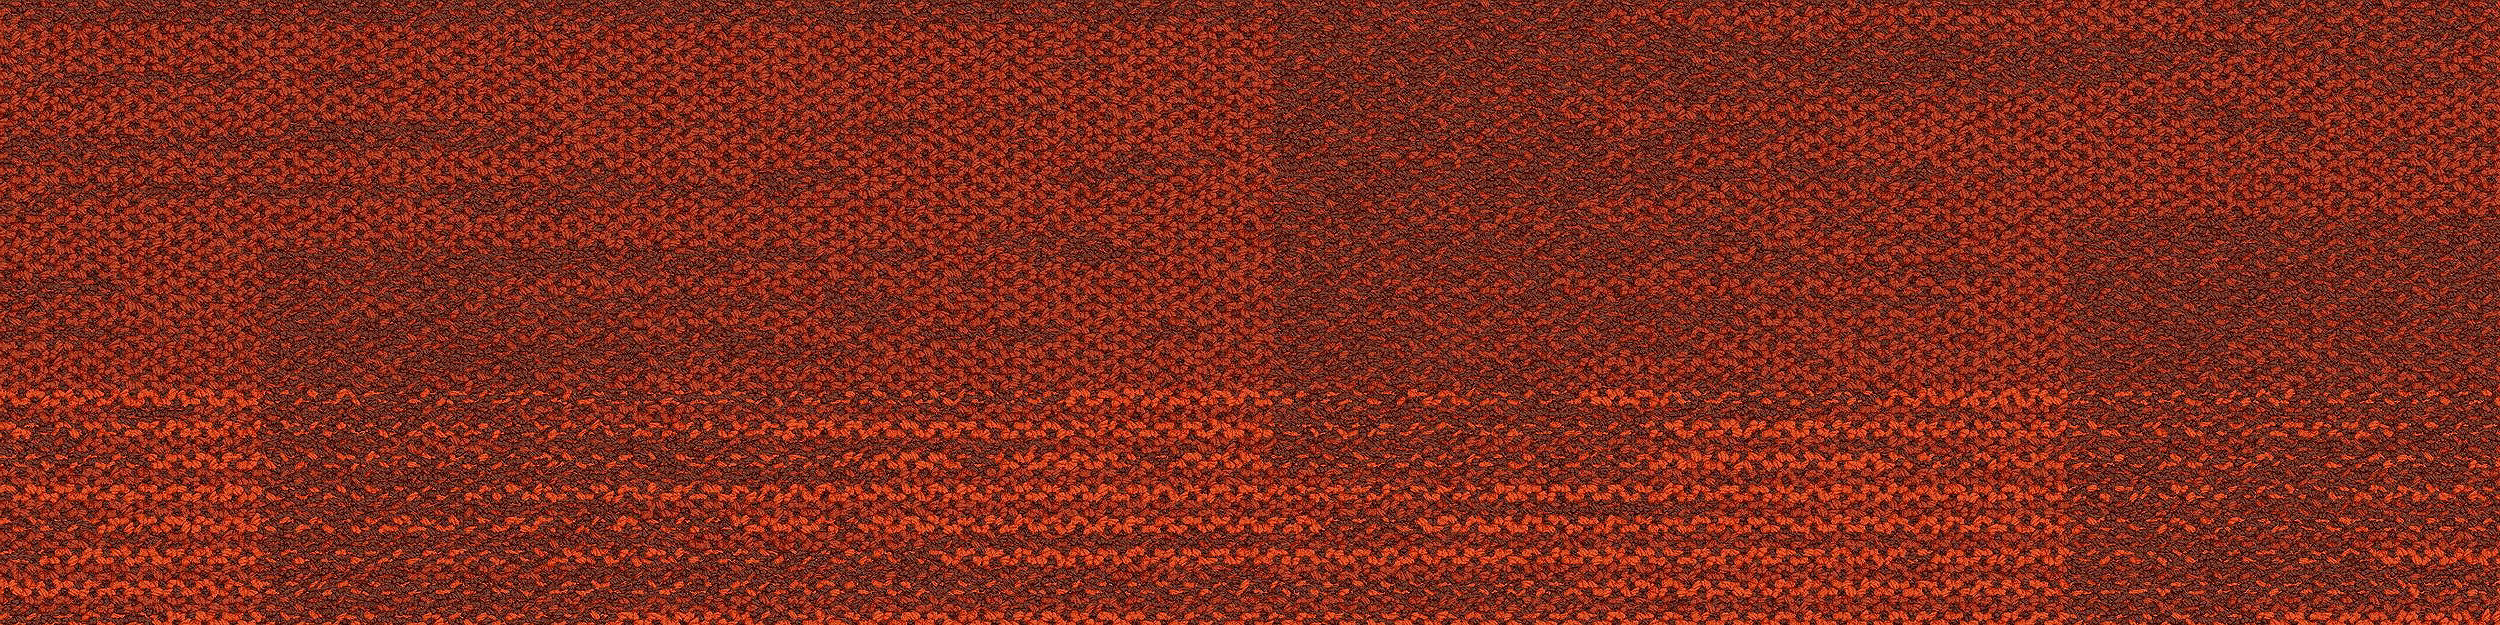 AE317 Carpet Tile In Persimmon image number 13